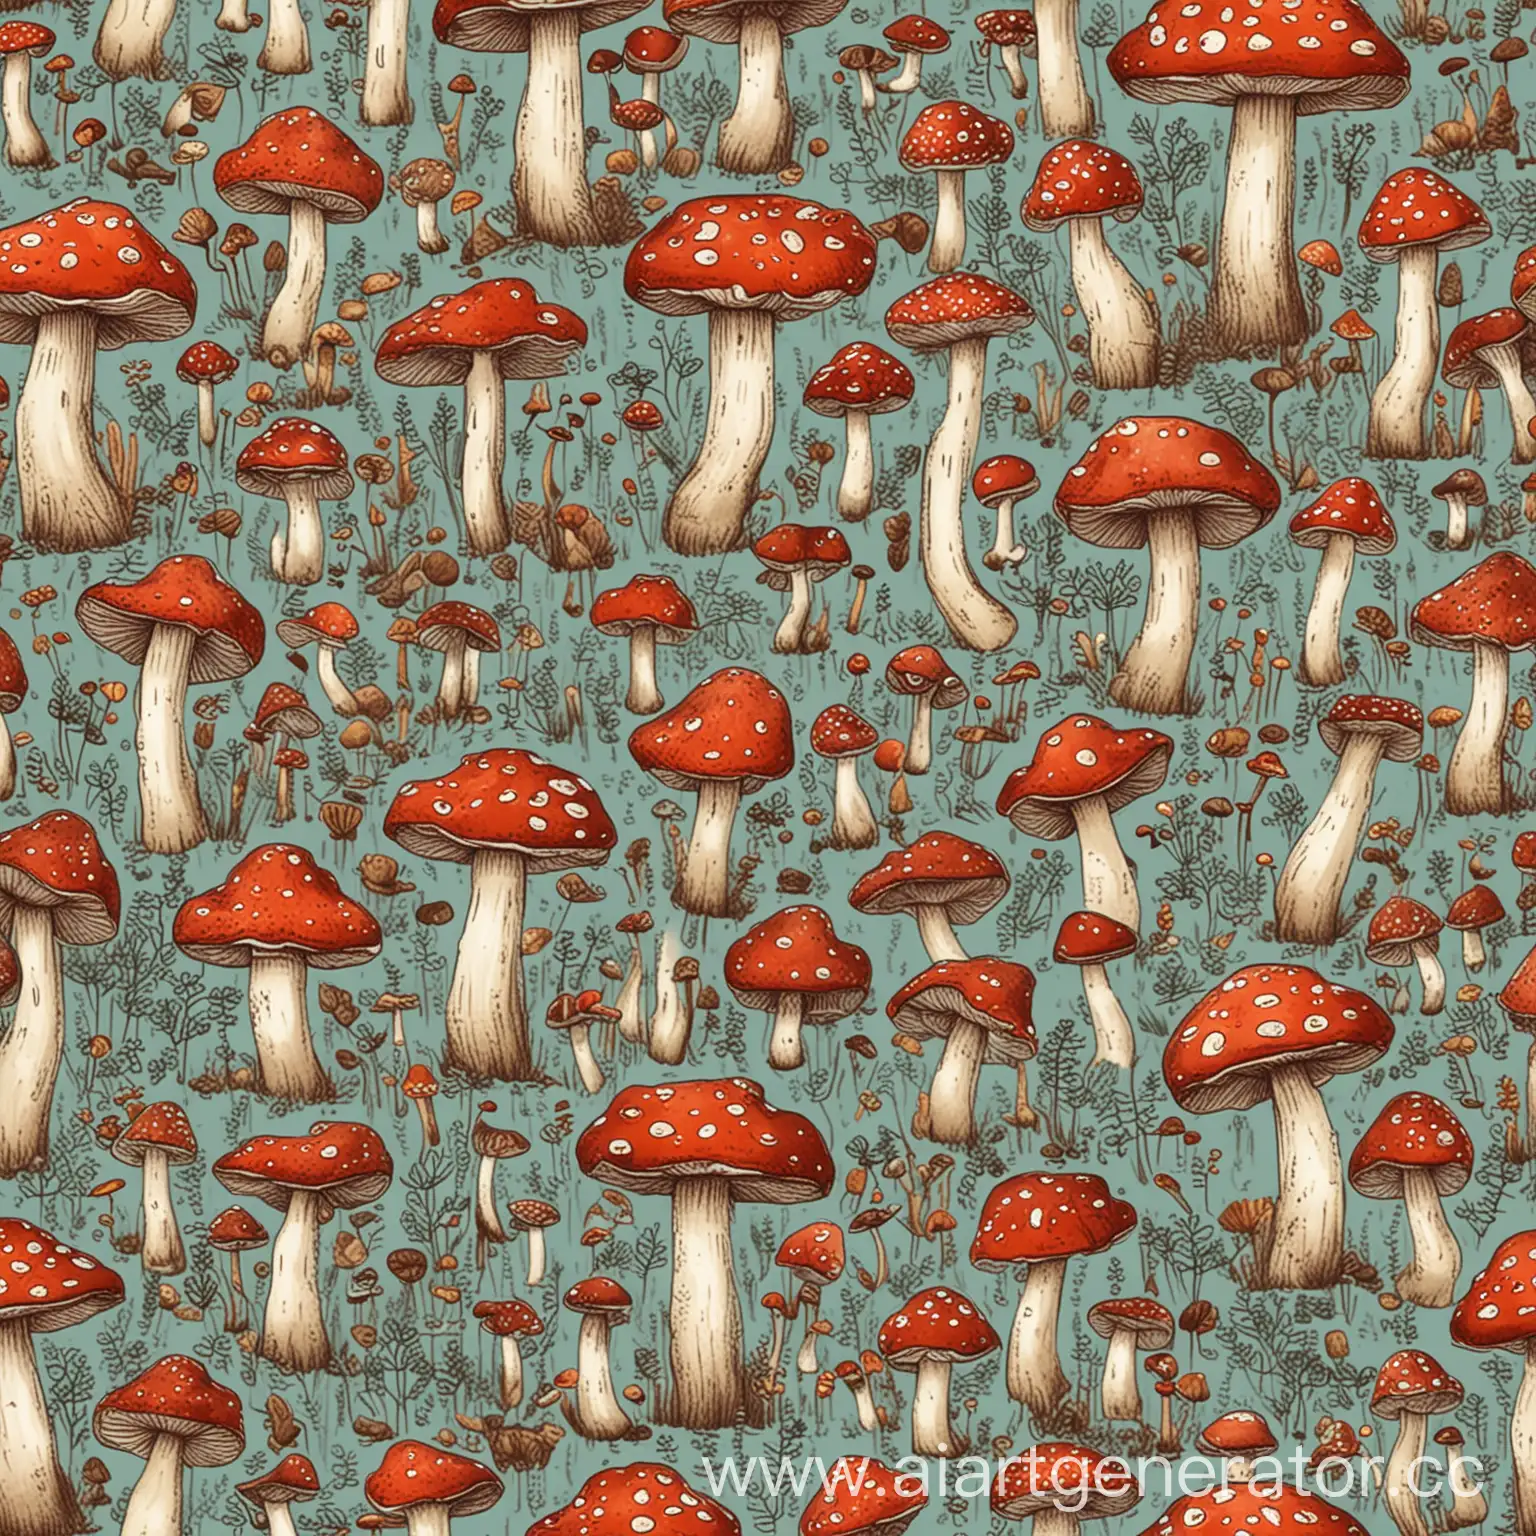 Enchanted-Forest-with-Whimsical-Mushroom-Illustrations